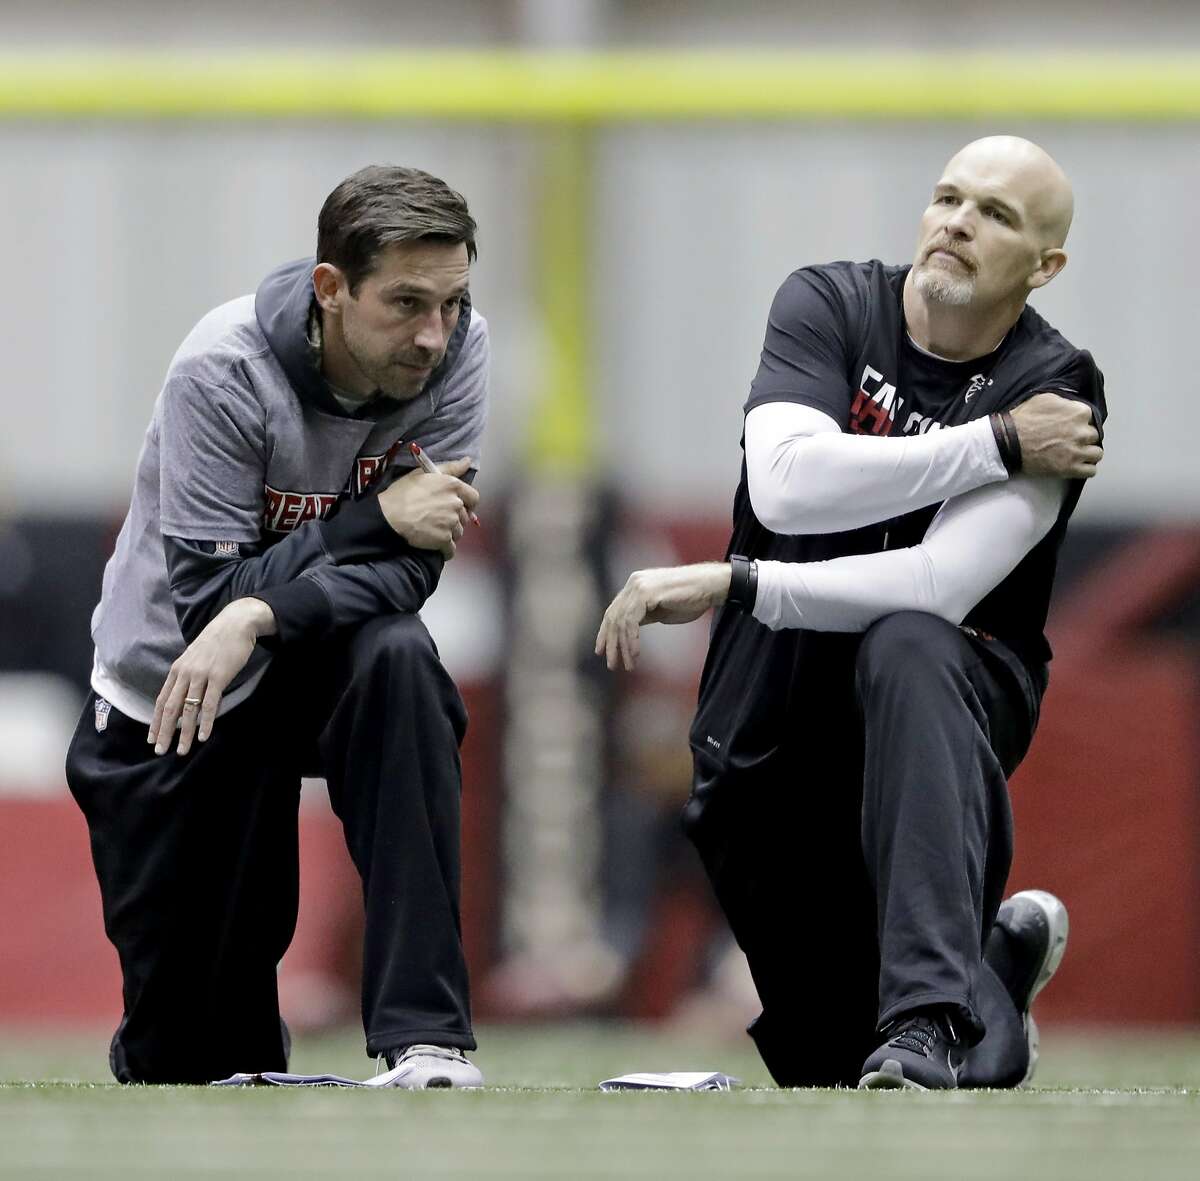 Atlanta Falcons head coach Dan Quinn, right, talks with offensive coordinator Kyle Shanahan during a workout at the NFL football team's practice facility in Flowery Branch, Ga., Friday, Jan. 27, 2017. (AP Photo/David Goldman)